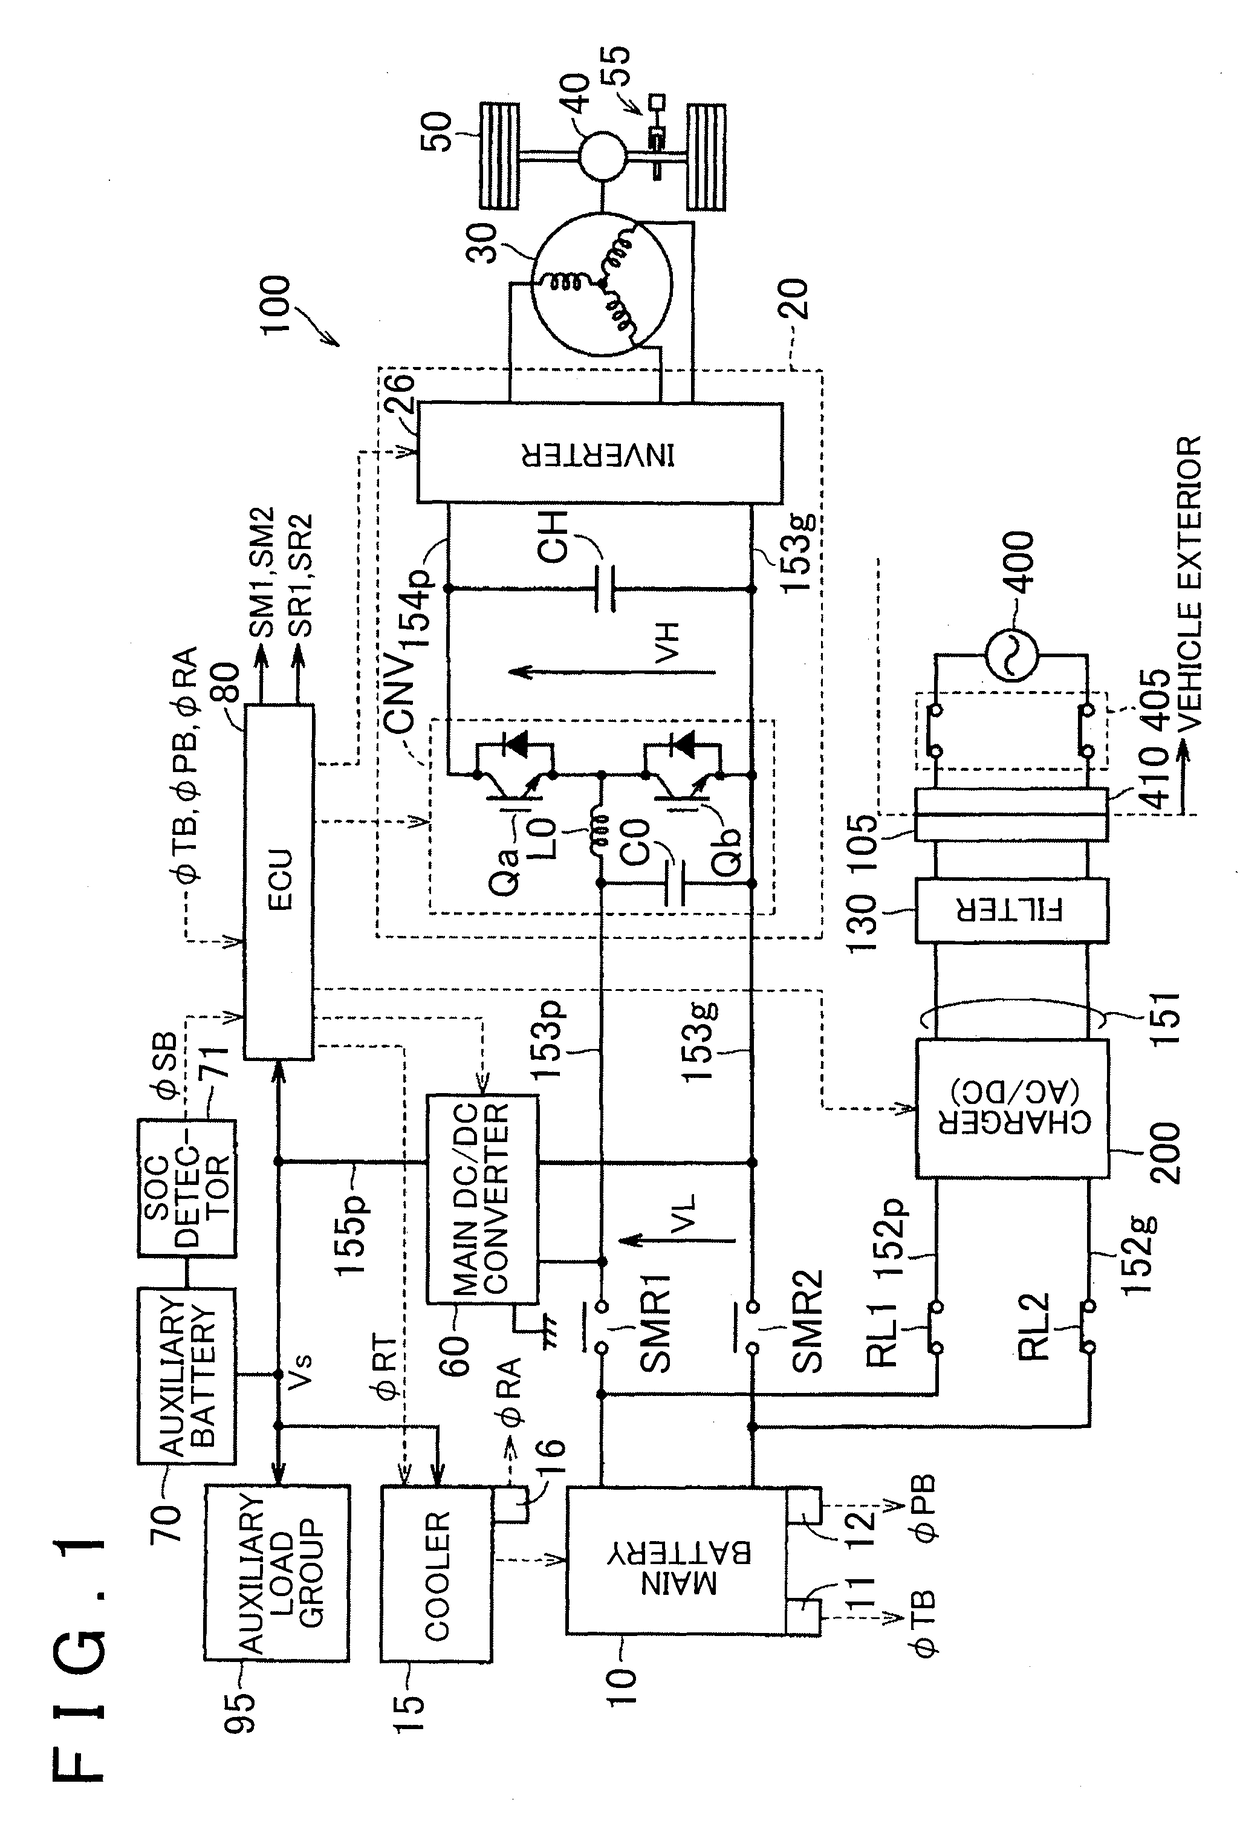 Power supply device for electric vehicle